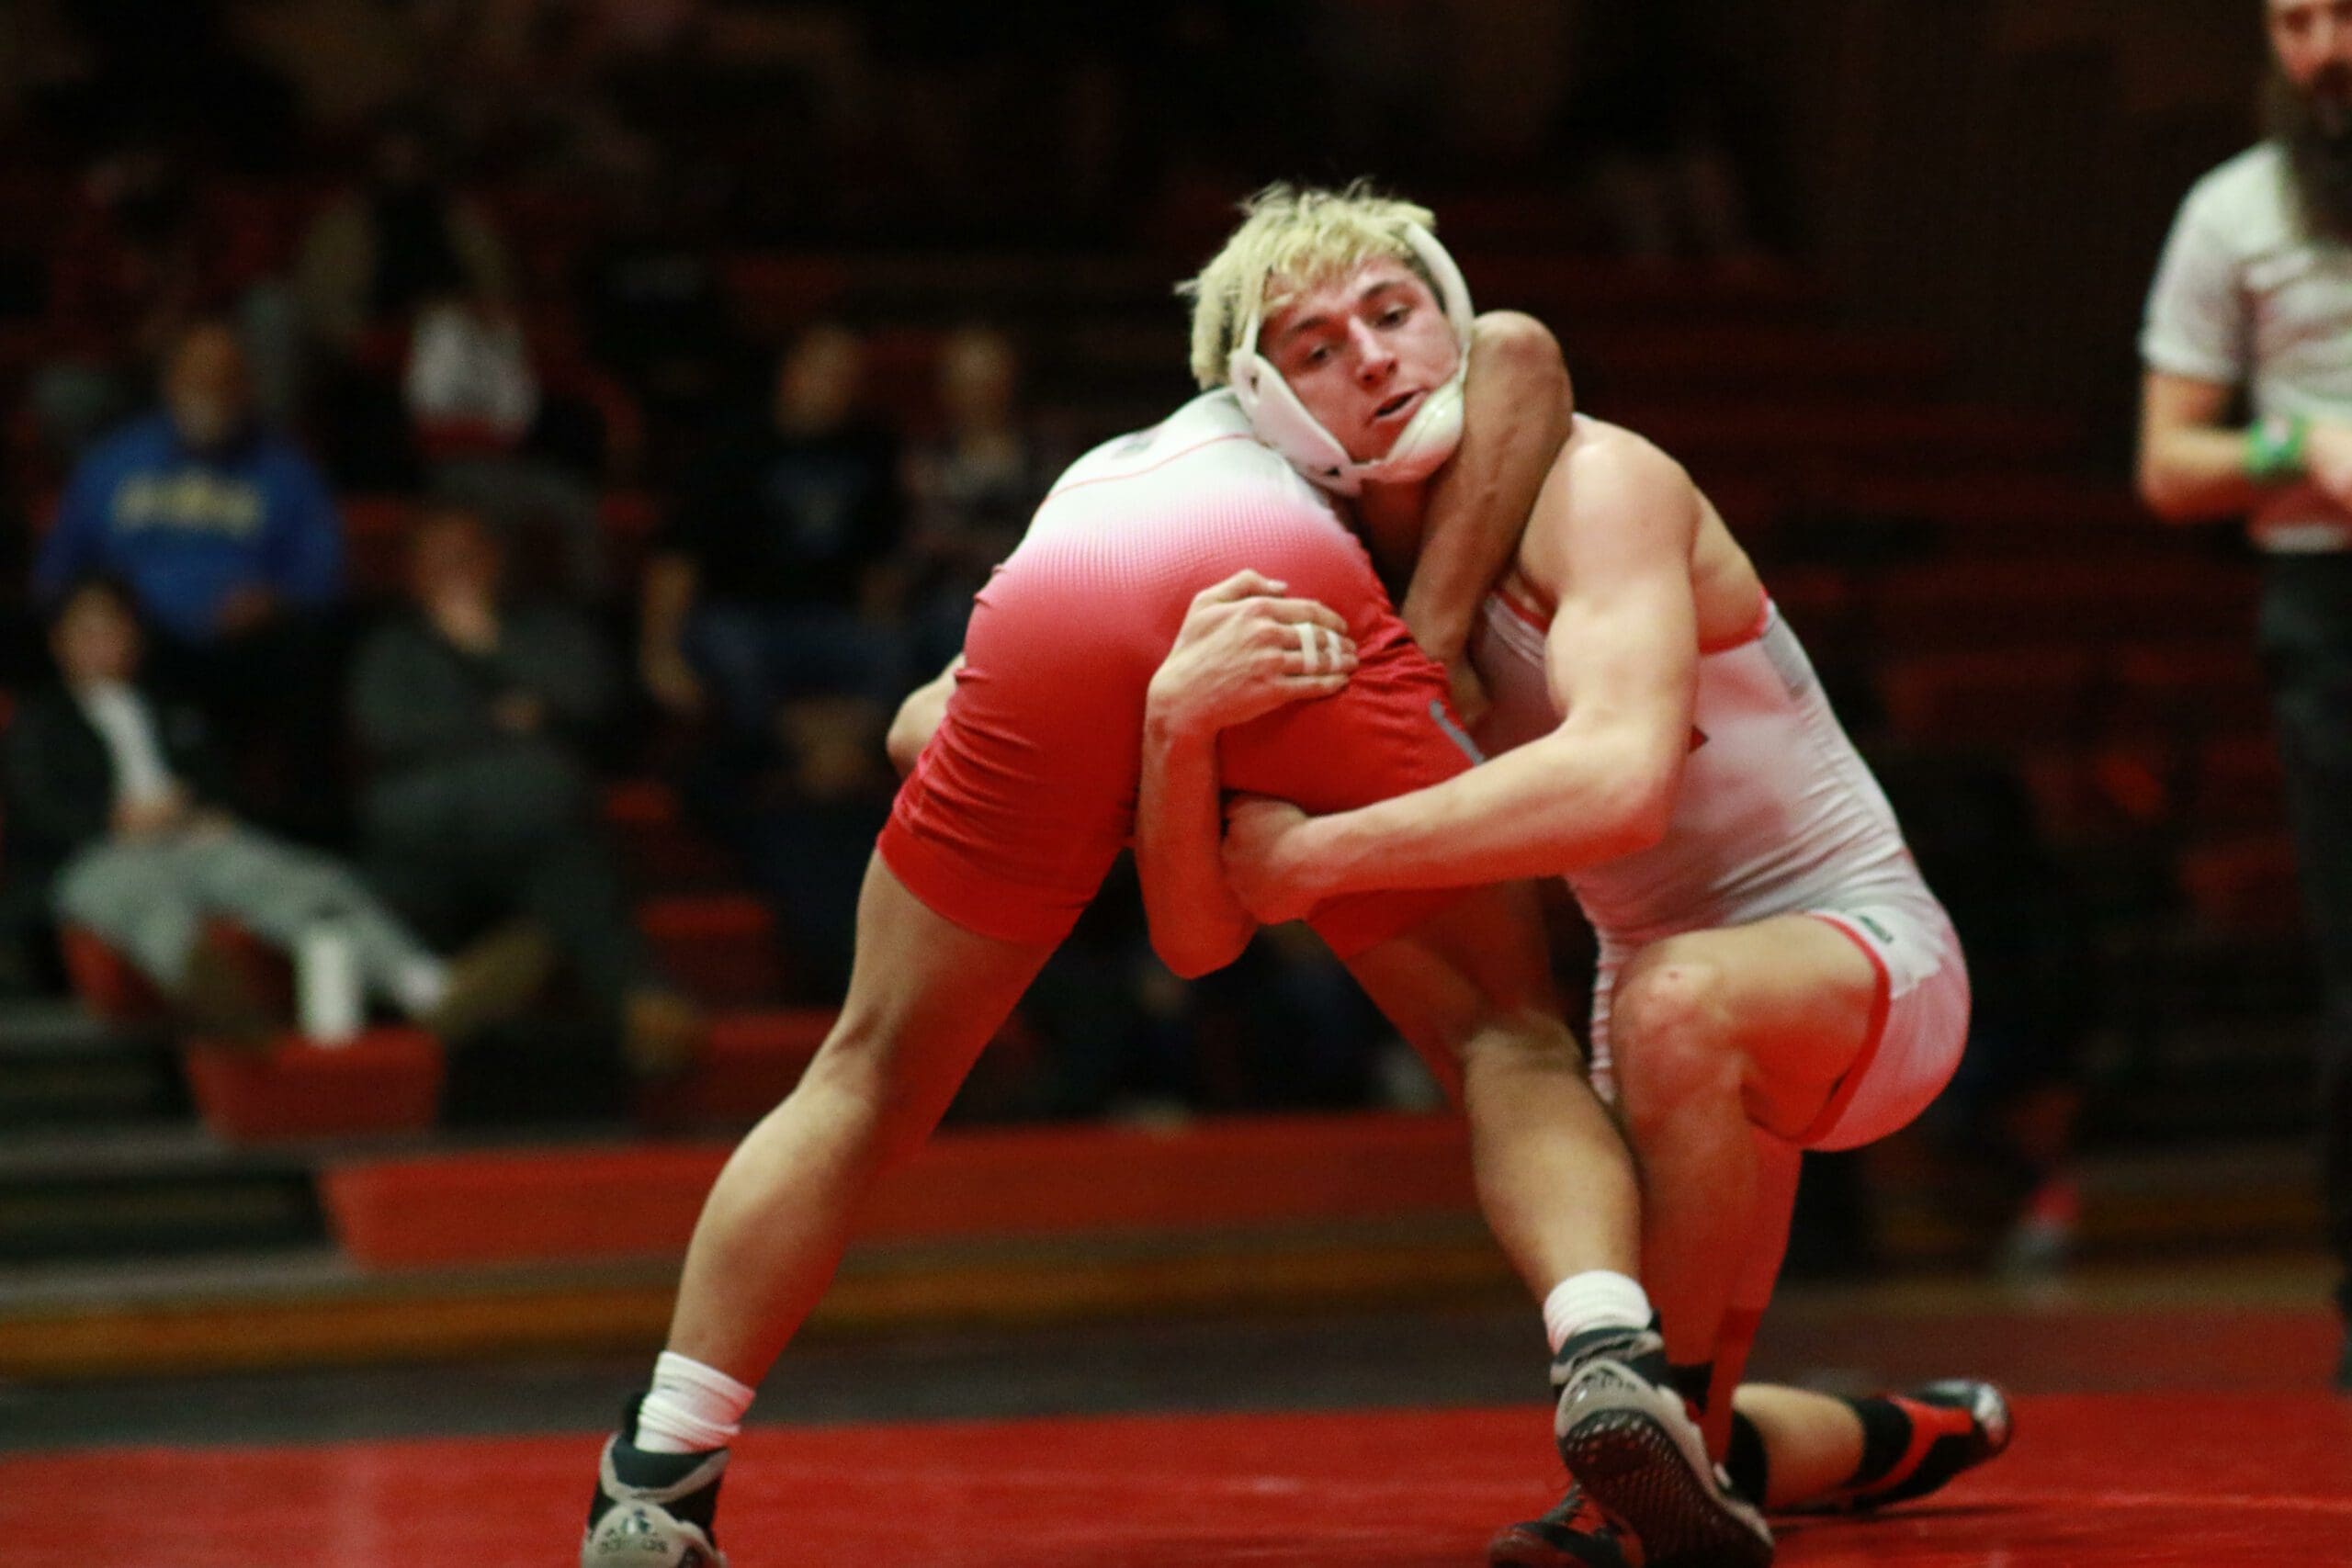 Featured image for “William Penn grapplers upset fifth-ranked Smyrna”